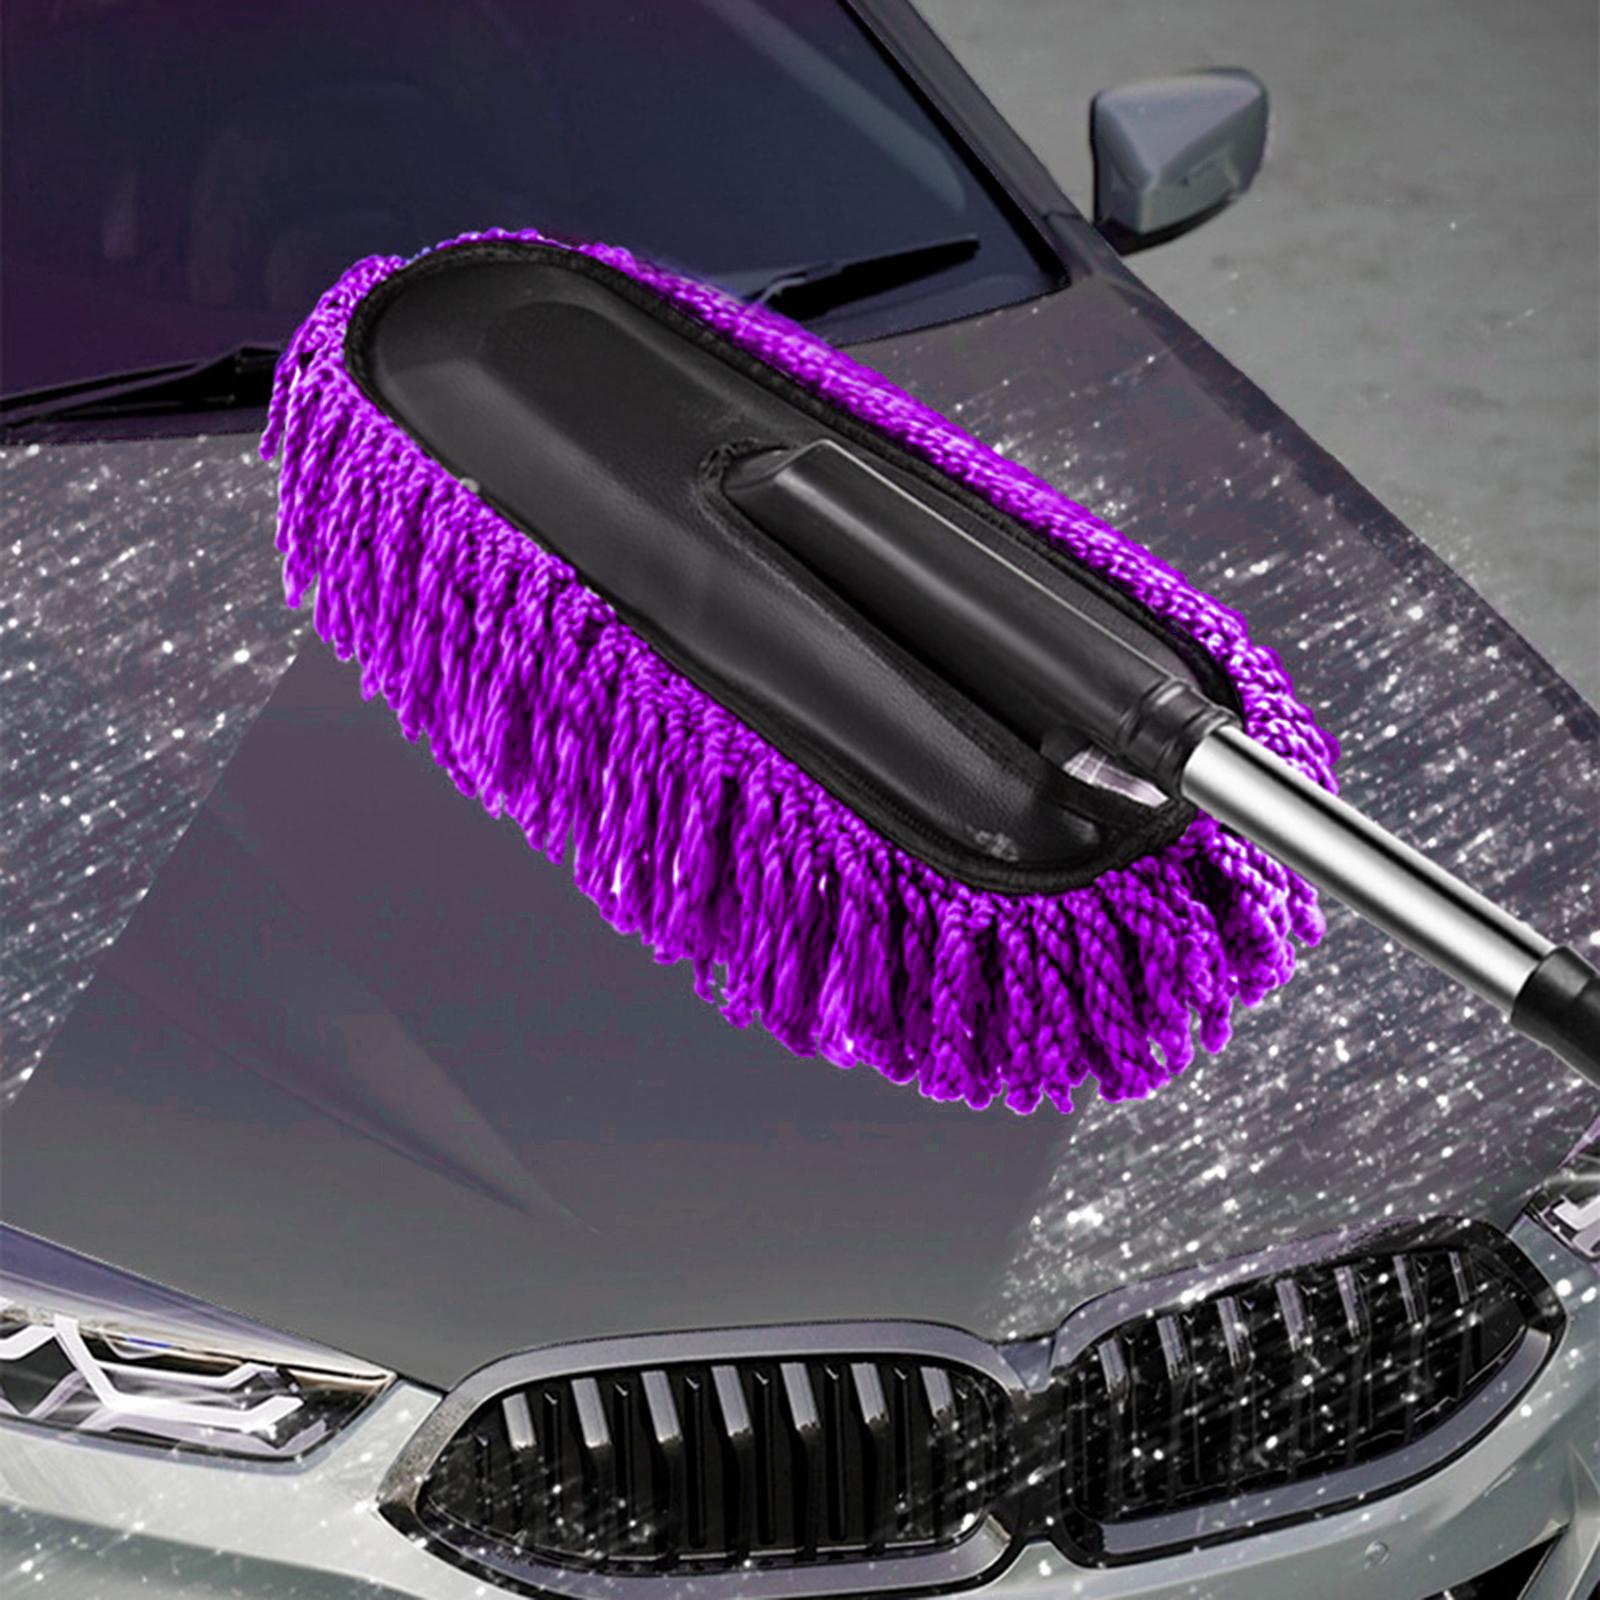 Multi Functional Car Brush Duster Washing for Bedrooms Kitchens Home Violet